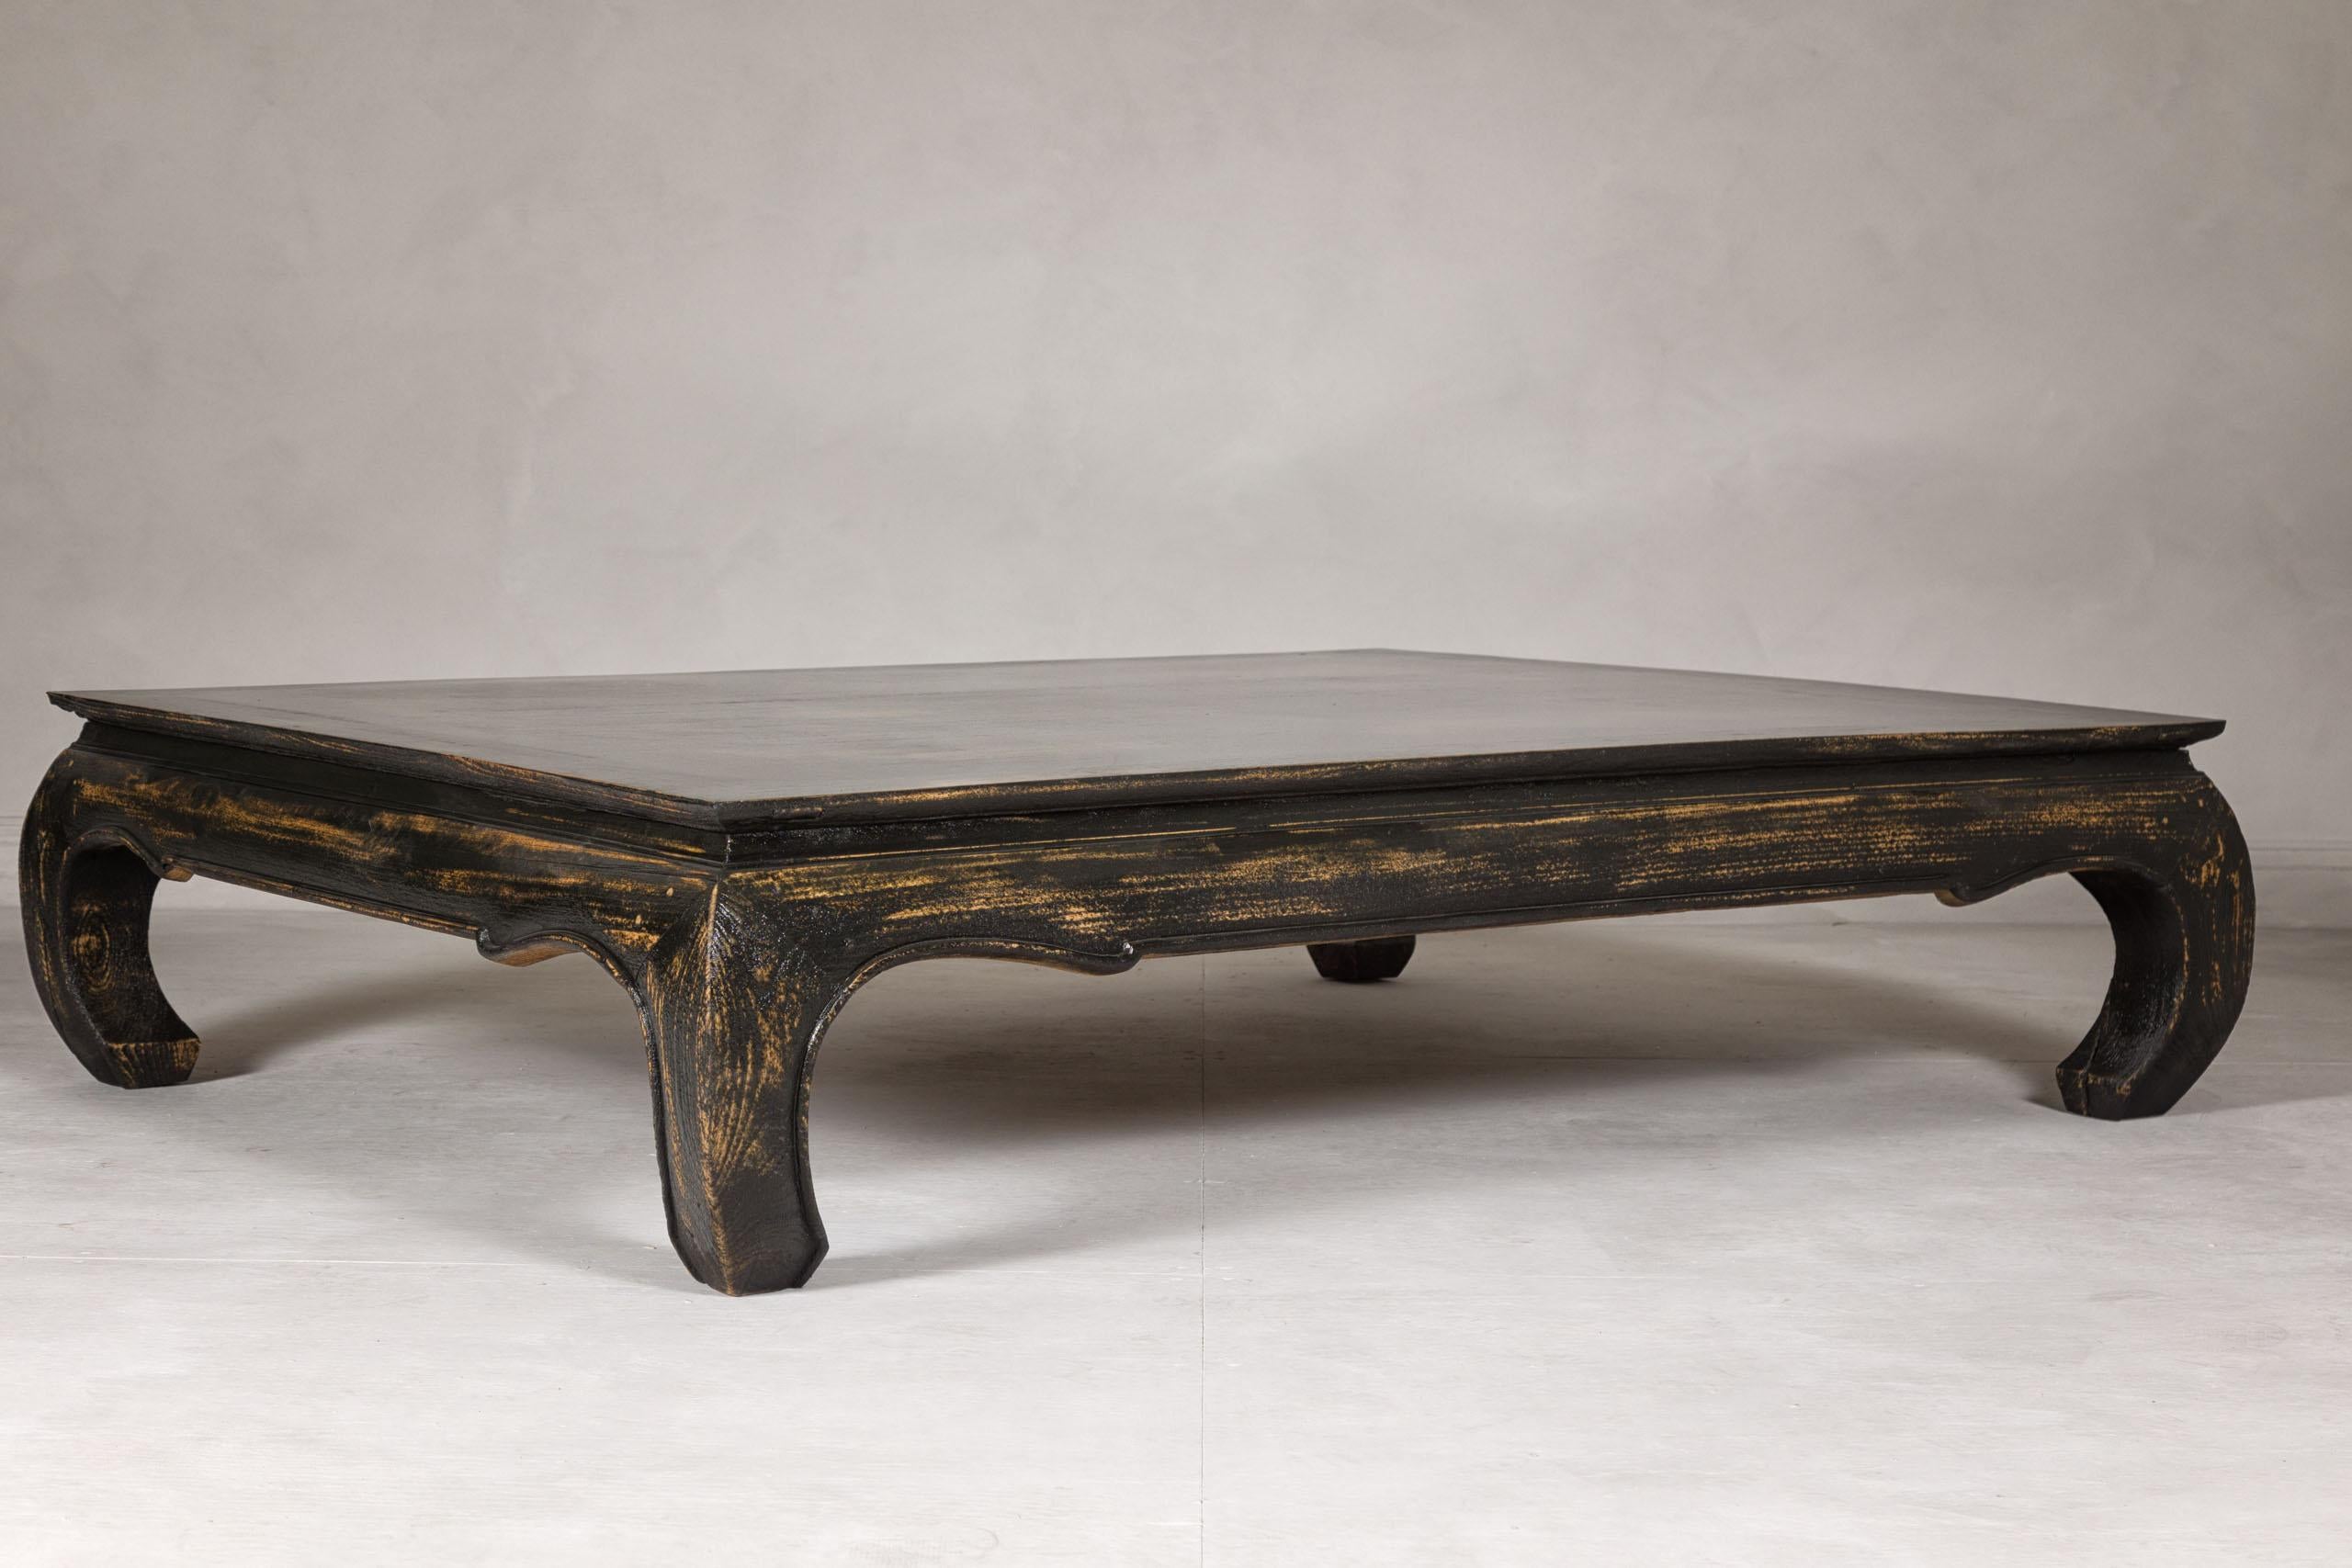 Wood Chow Leg Low Kang Coffee Table with Distressed Black Finish, Midcentury For Sale